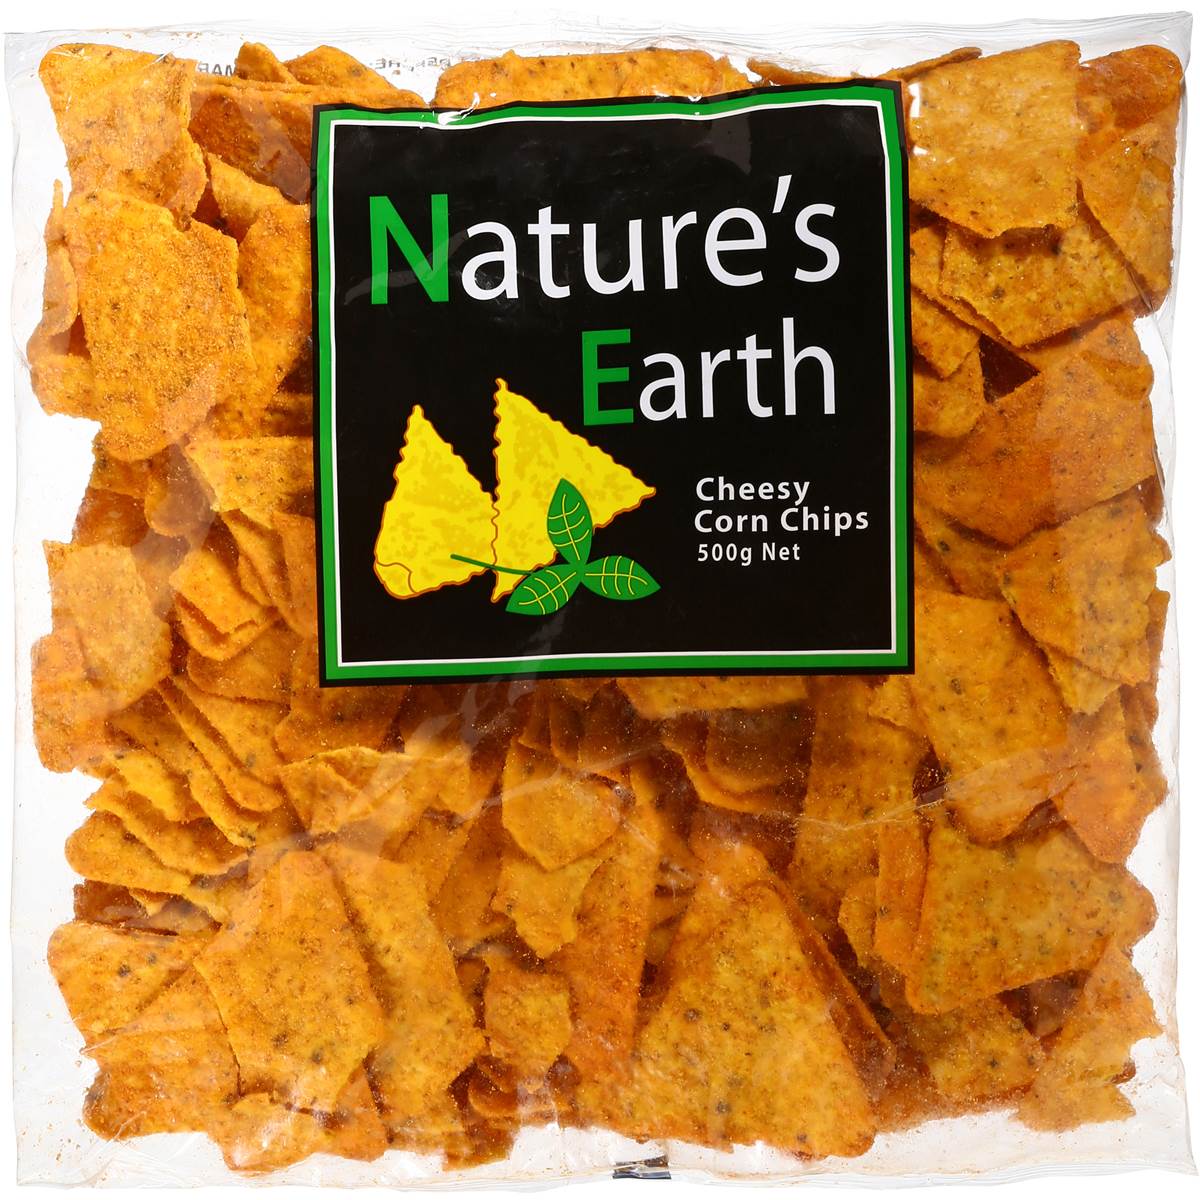 Calories in Nature's Earth Corn Chips Cheese